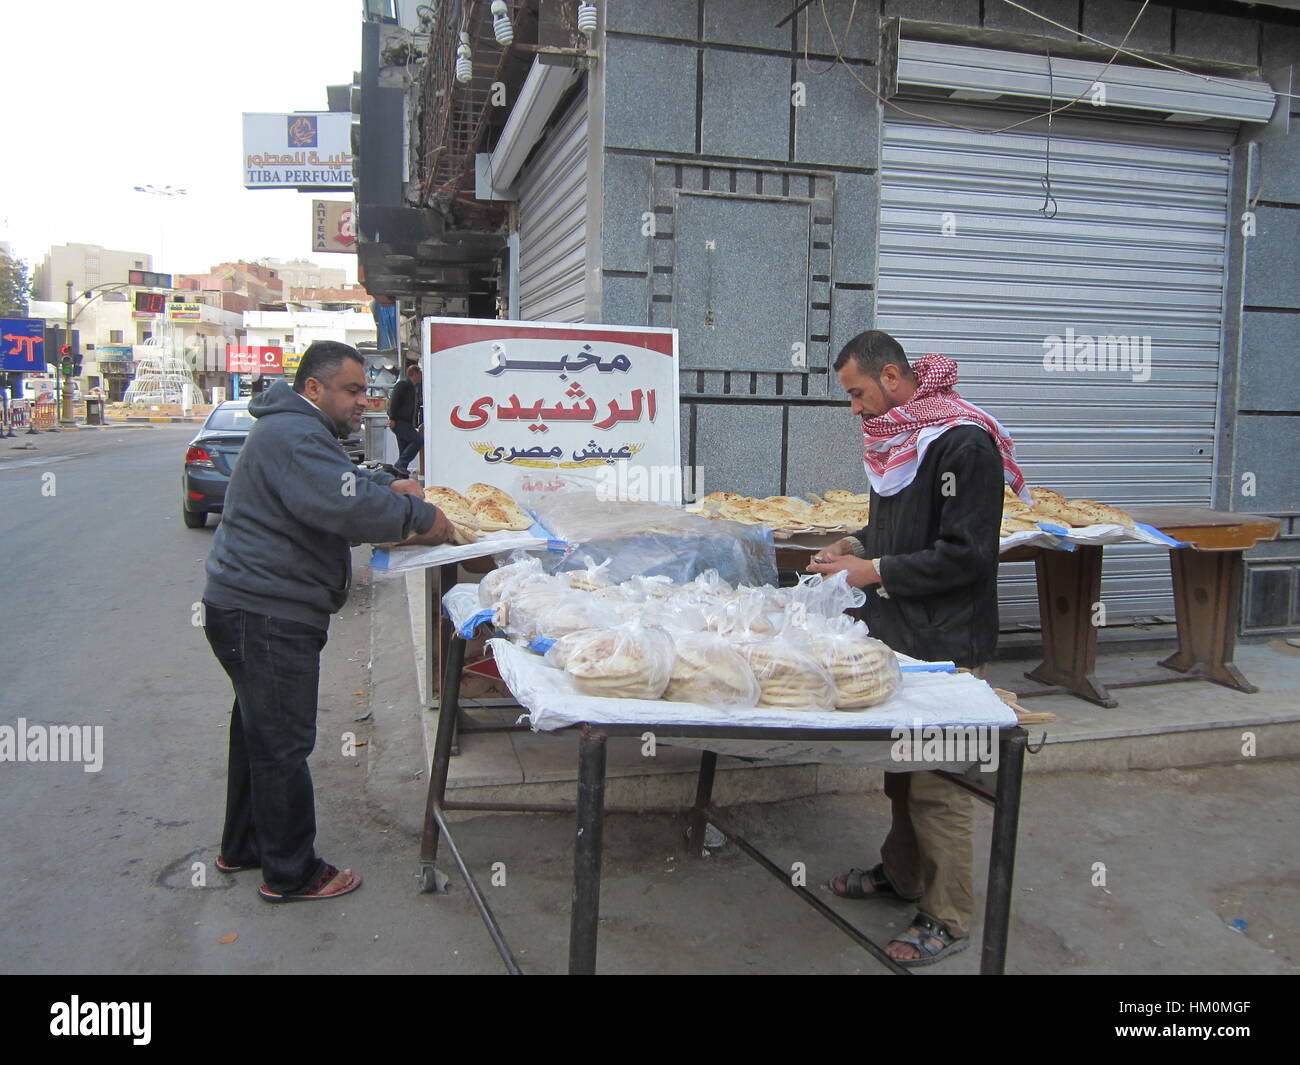 Street bread seller and a buyer at the open bread stand. Hurghada, Egypt. Stock Photo